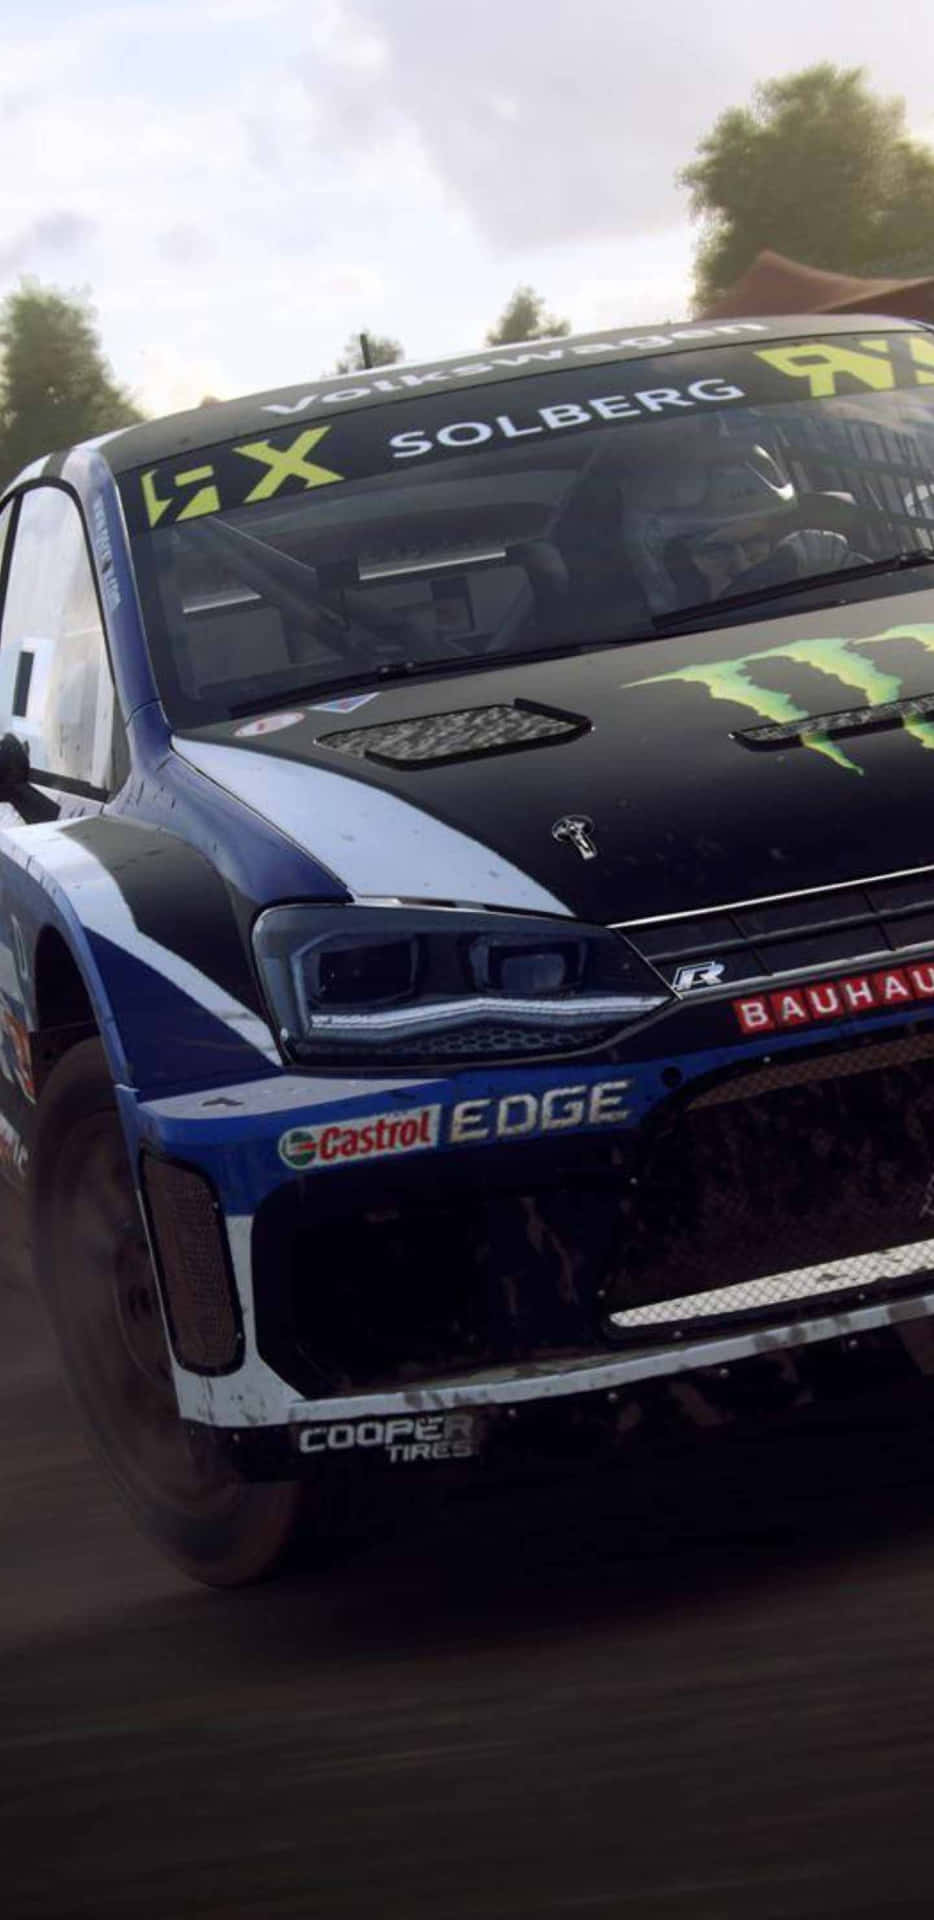 Experience the Adrenaline Rush of Racing on Android with Dirt Rally